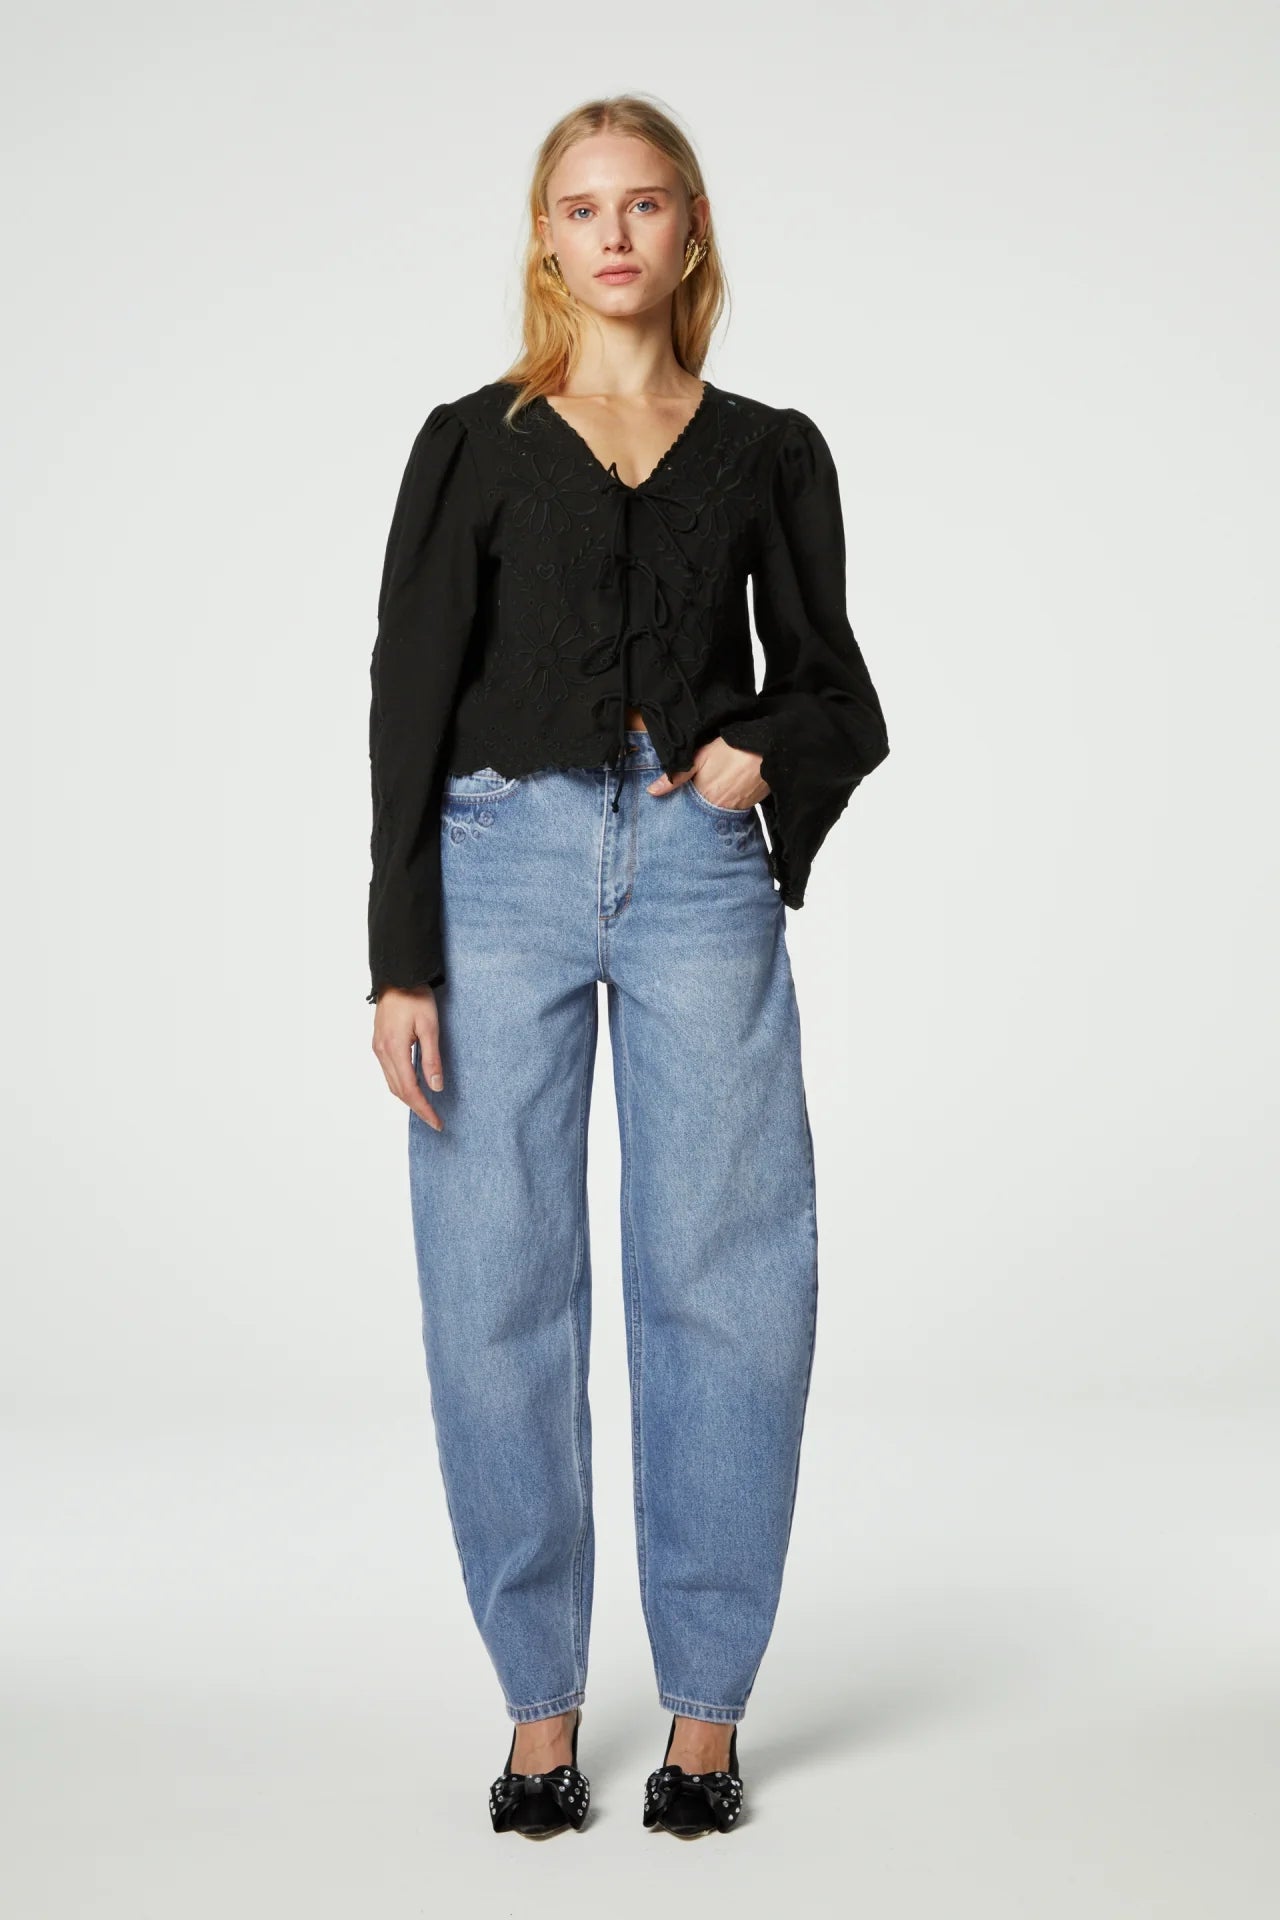 The model is wearing high waisted jeans and a Sterre Top in black by Fabienne Chapot for a feminine look.